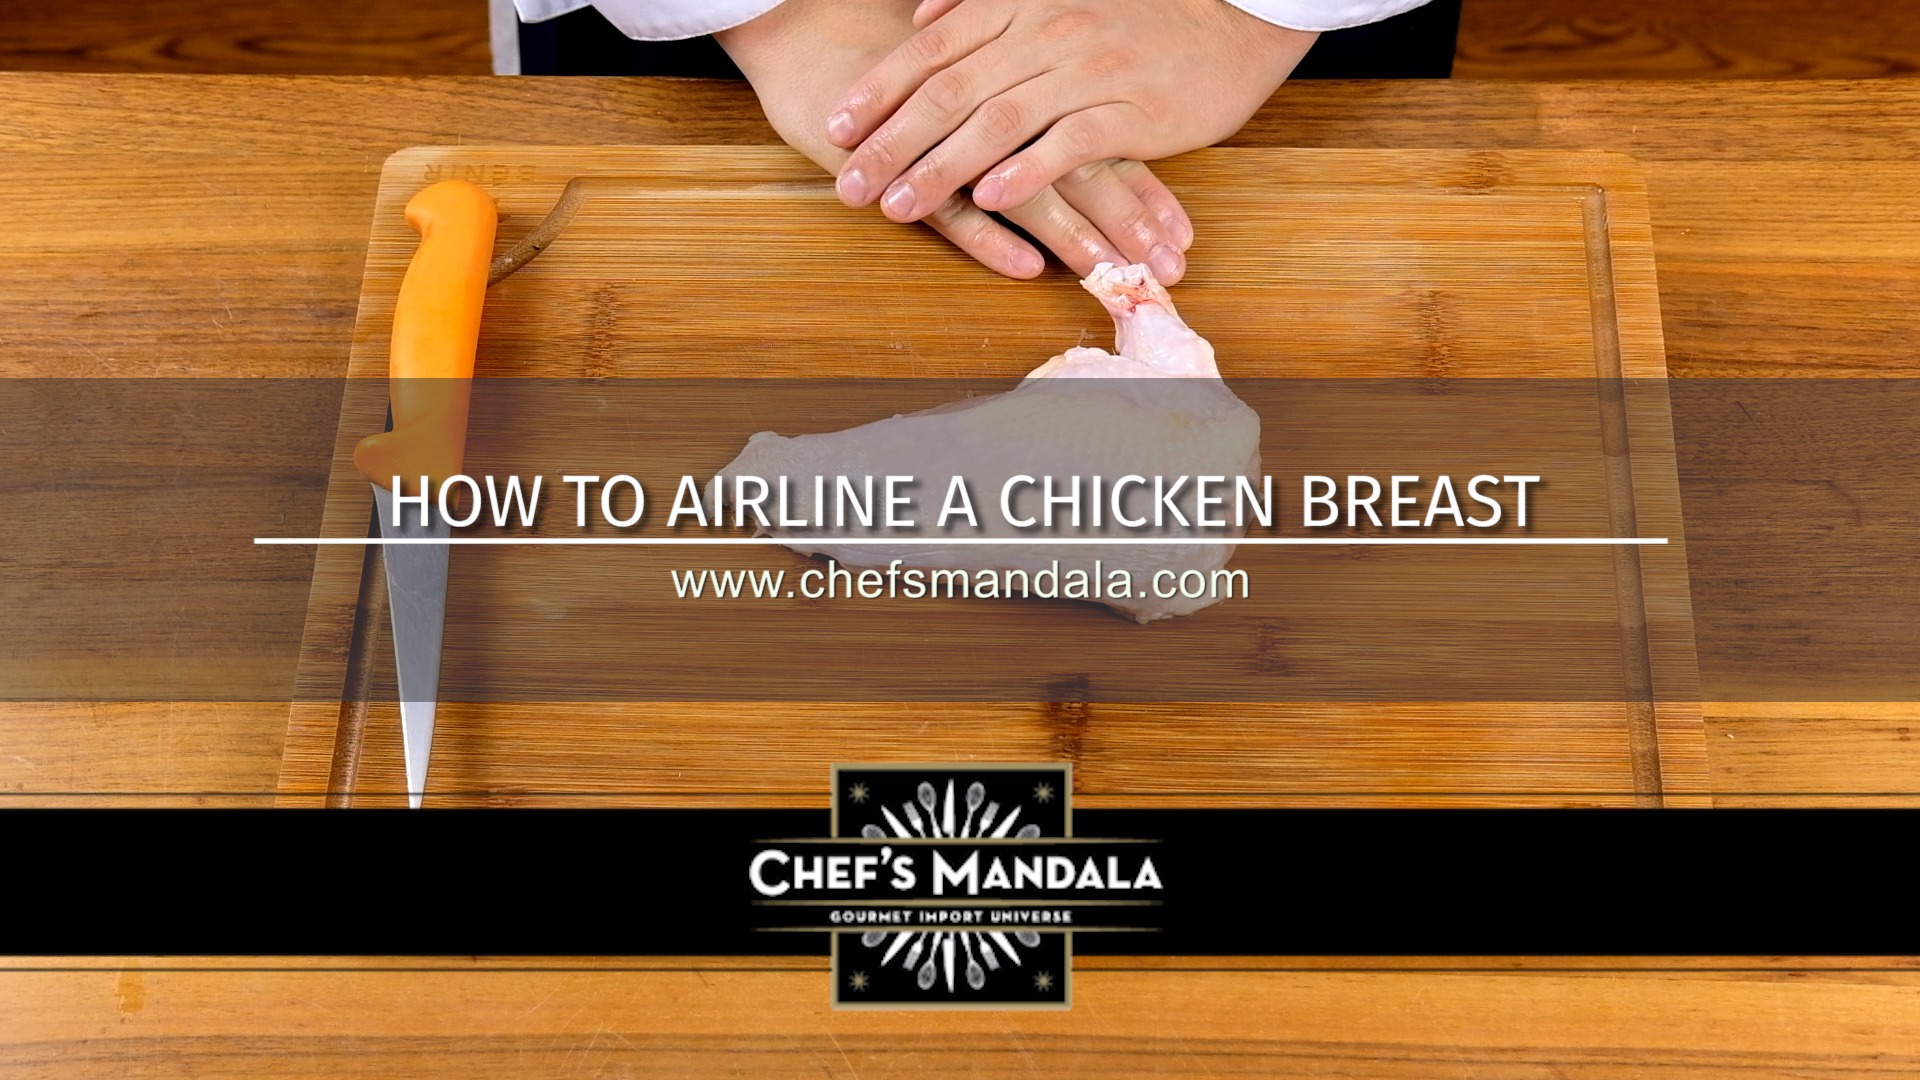 HOW TO AIRLINE A CHICKEN BREAST